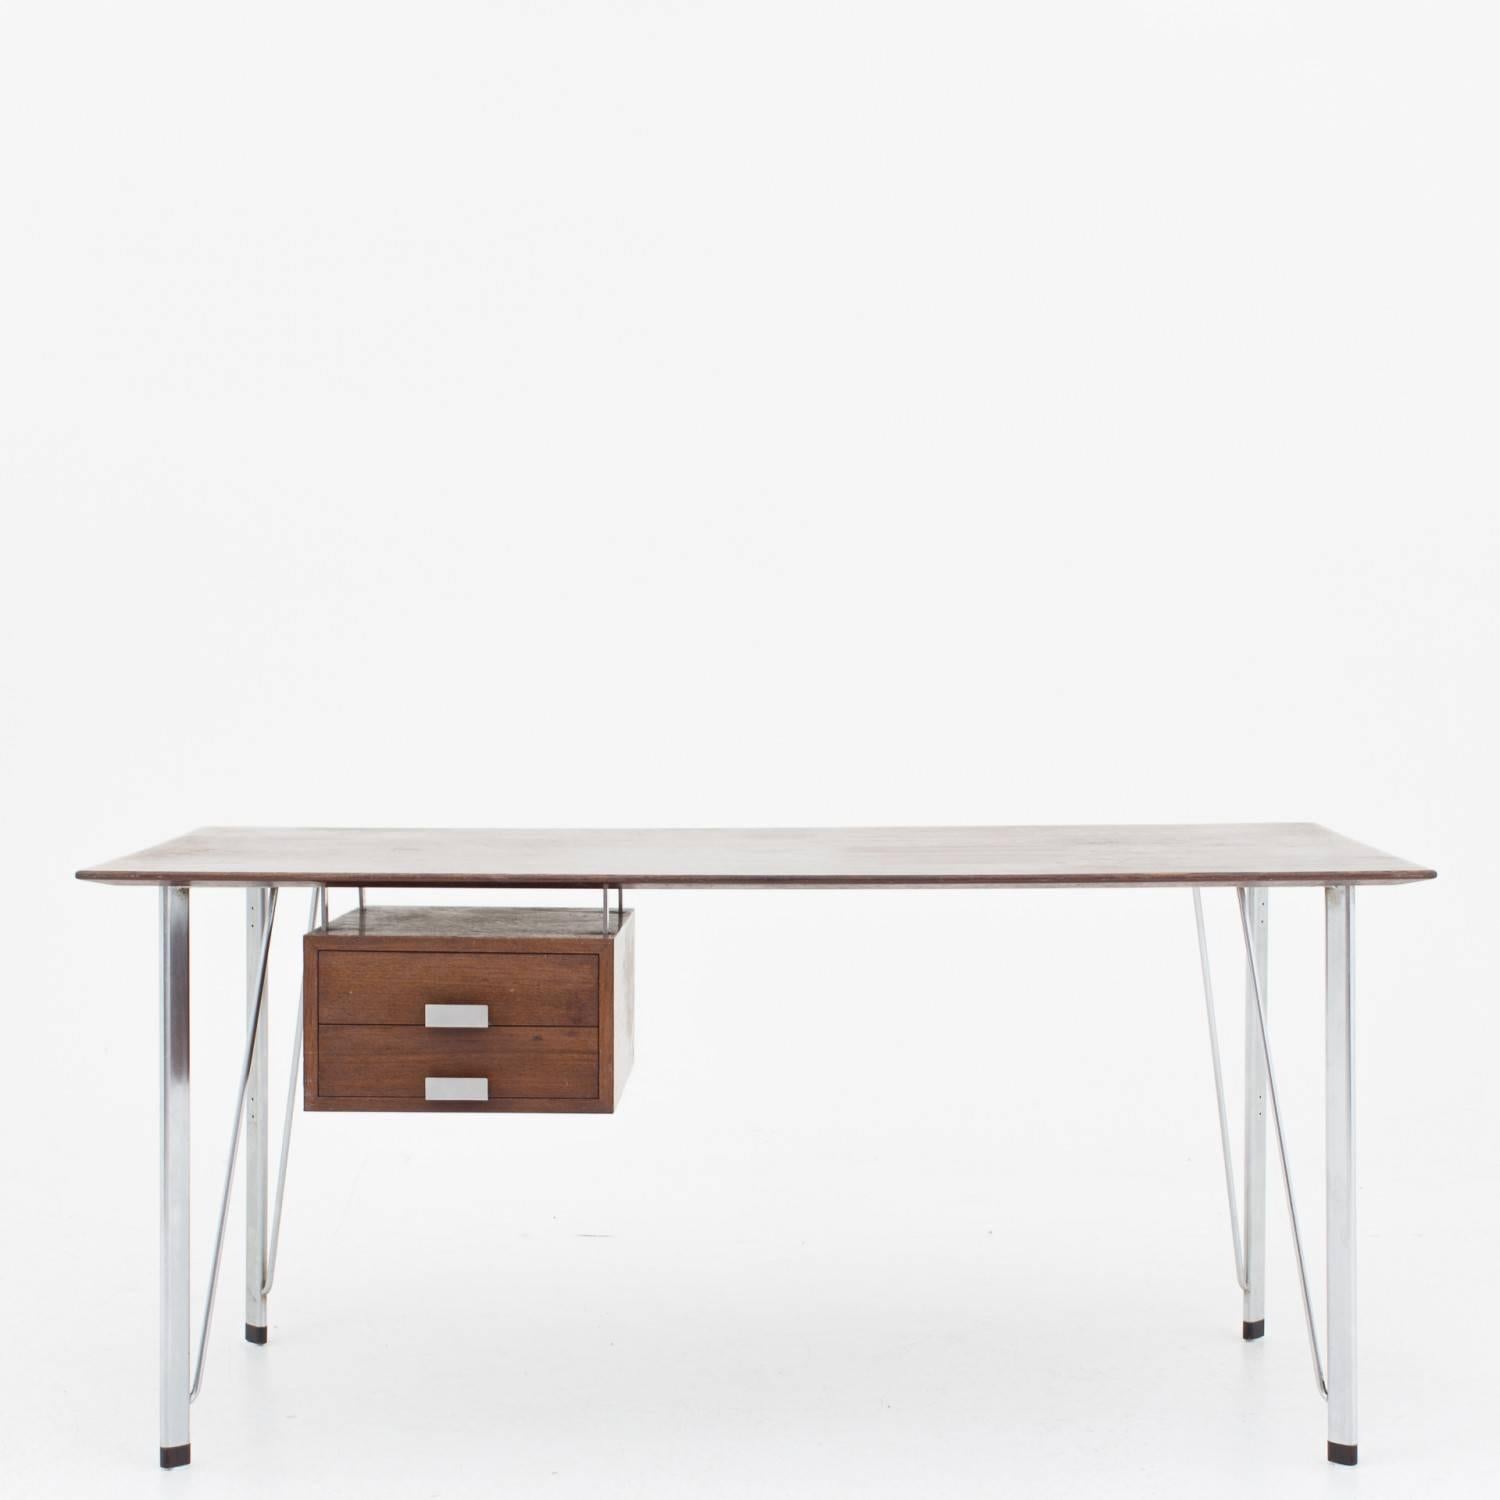 Desk in wenge and steel, two front drawers with handles in metal. Designed by Arne Jacobsen. Maker Fritz Hansen.